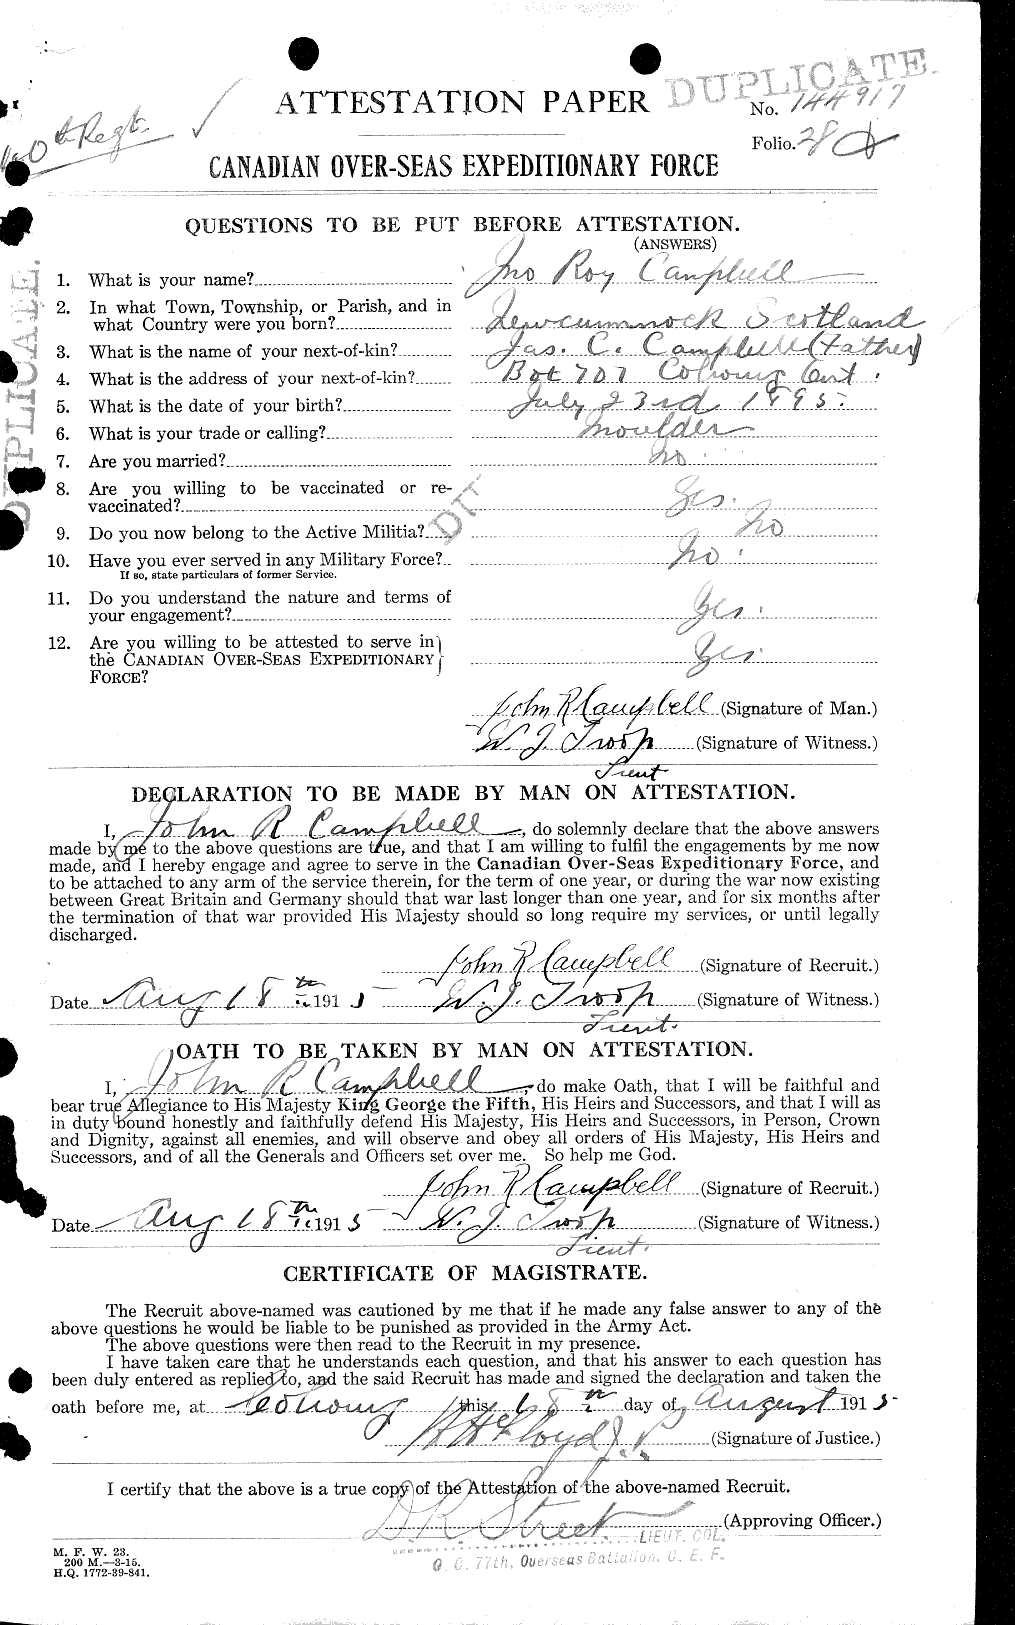 Personnel Records of the First World War - CEF 003785a